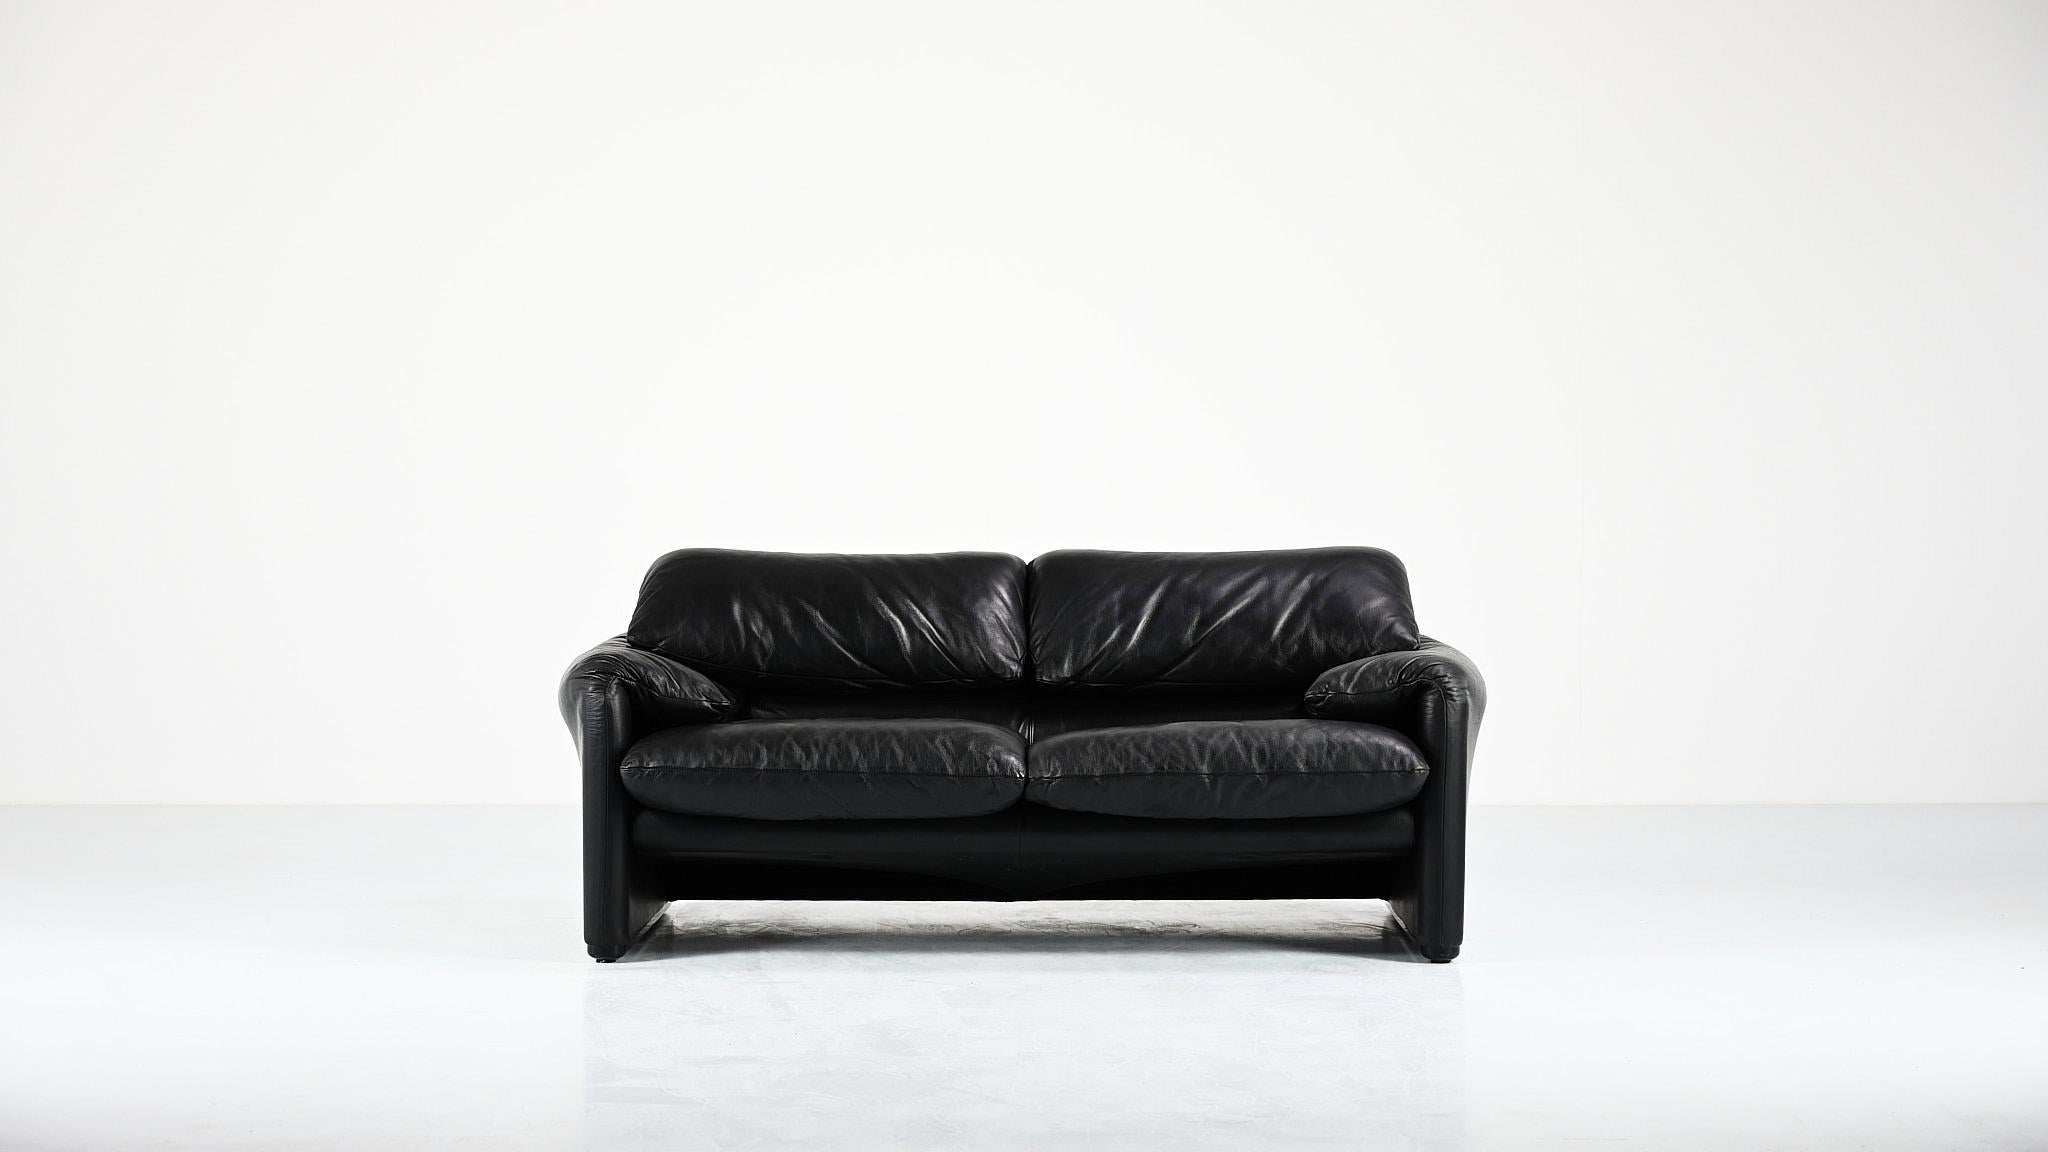 Sofa 675 “Maralunga”, by designer Vico Magistretti for Cassina. Iconic piece of contemporary design, the 675 series was first published in 1973 and won the Compasso d’Oro in 1979. Black leather showing small traces of use, very good overall